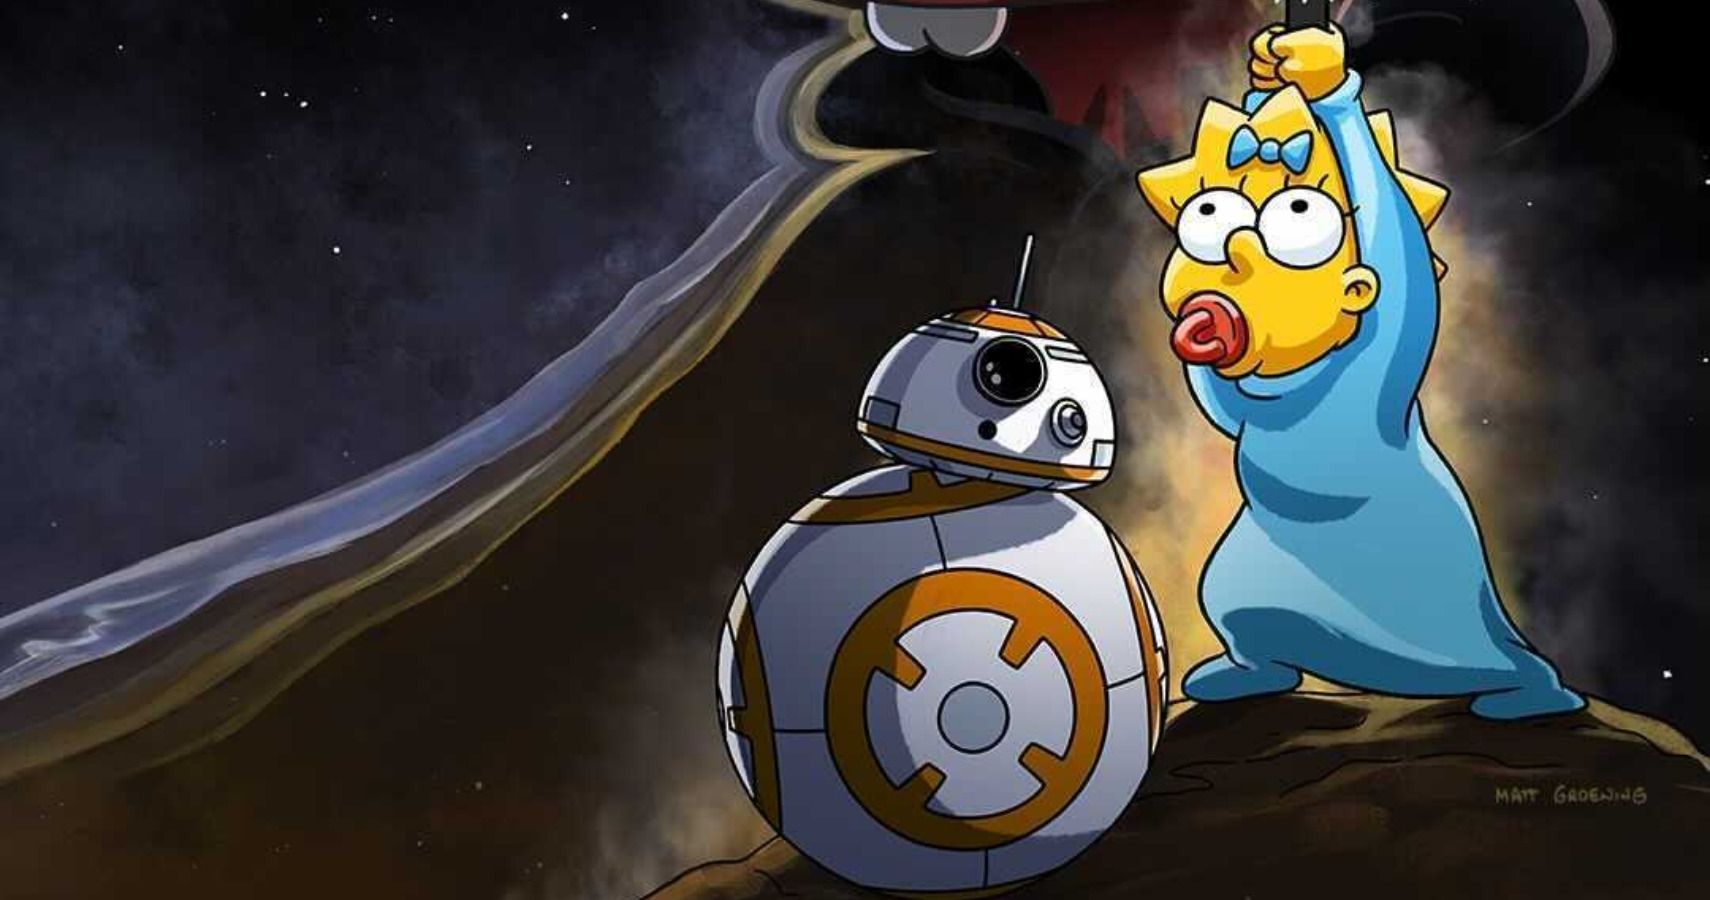 The Simpsons Meets Star Wars In May The Fourth Disney Plus Short